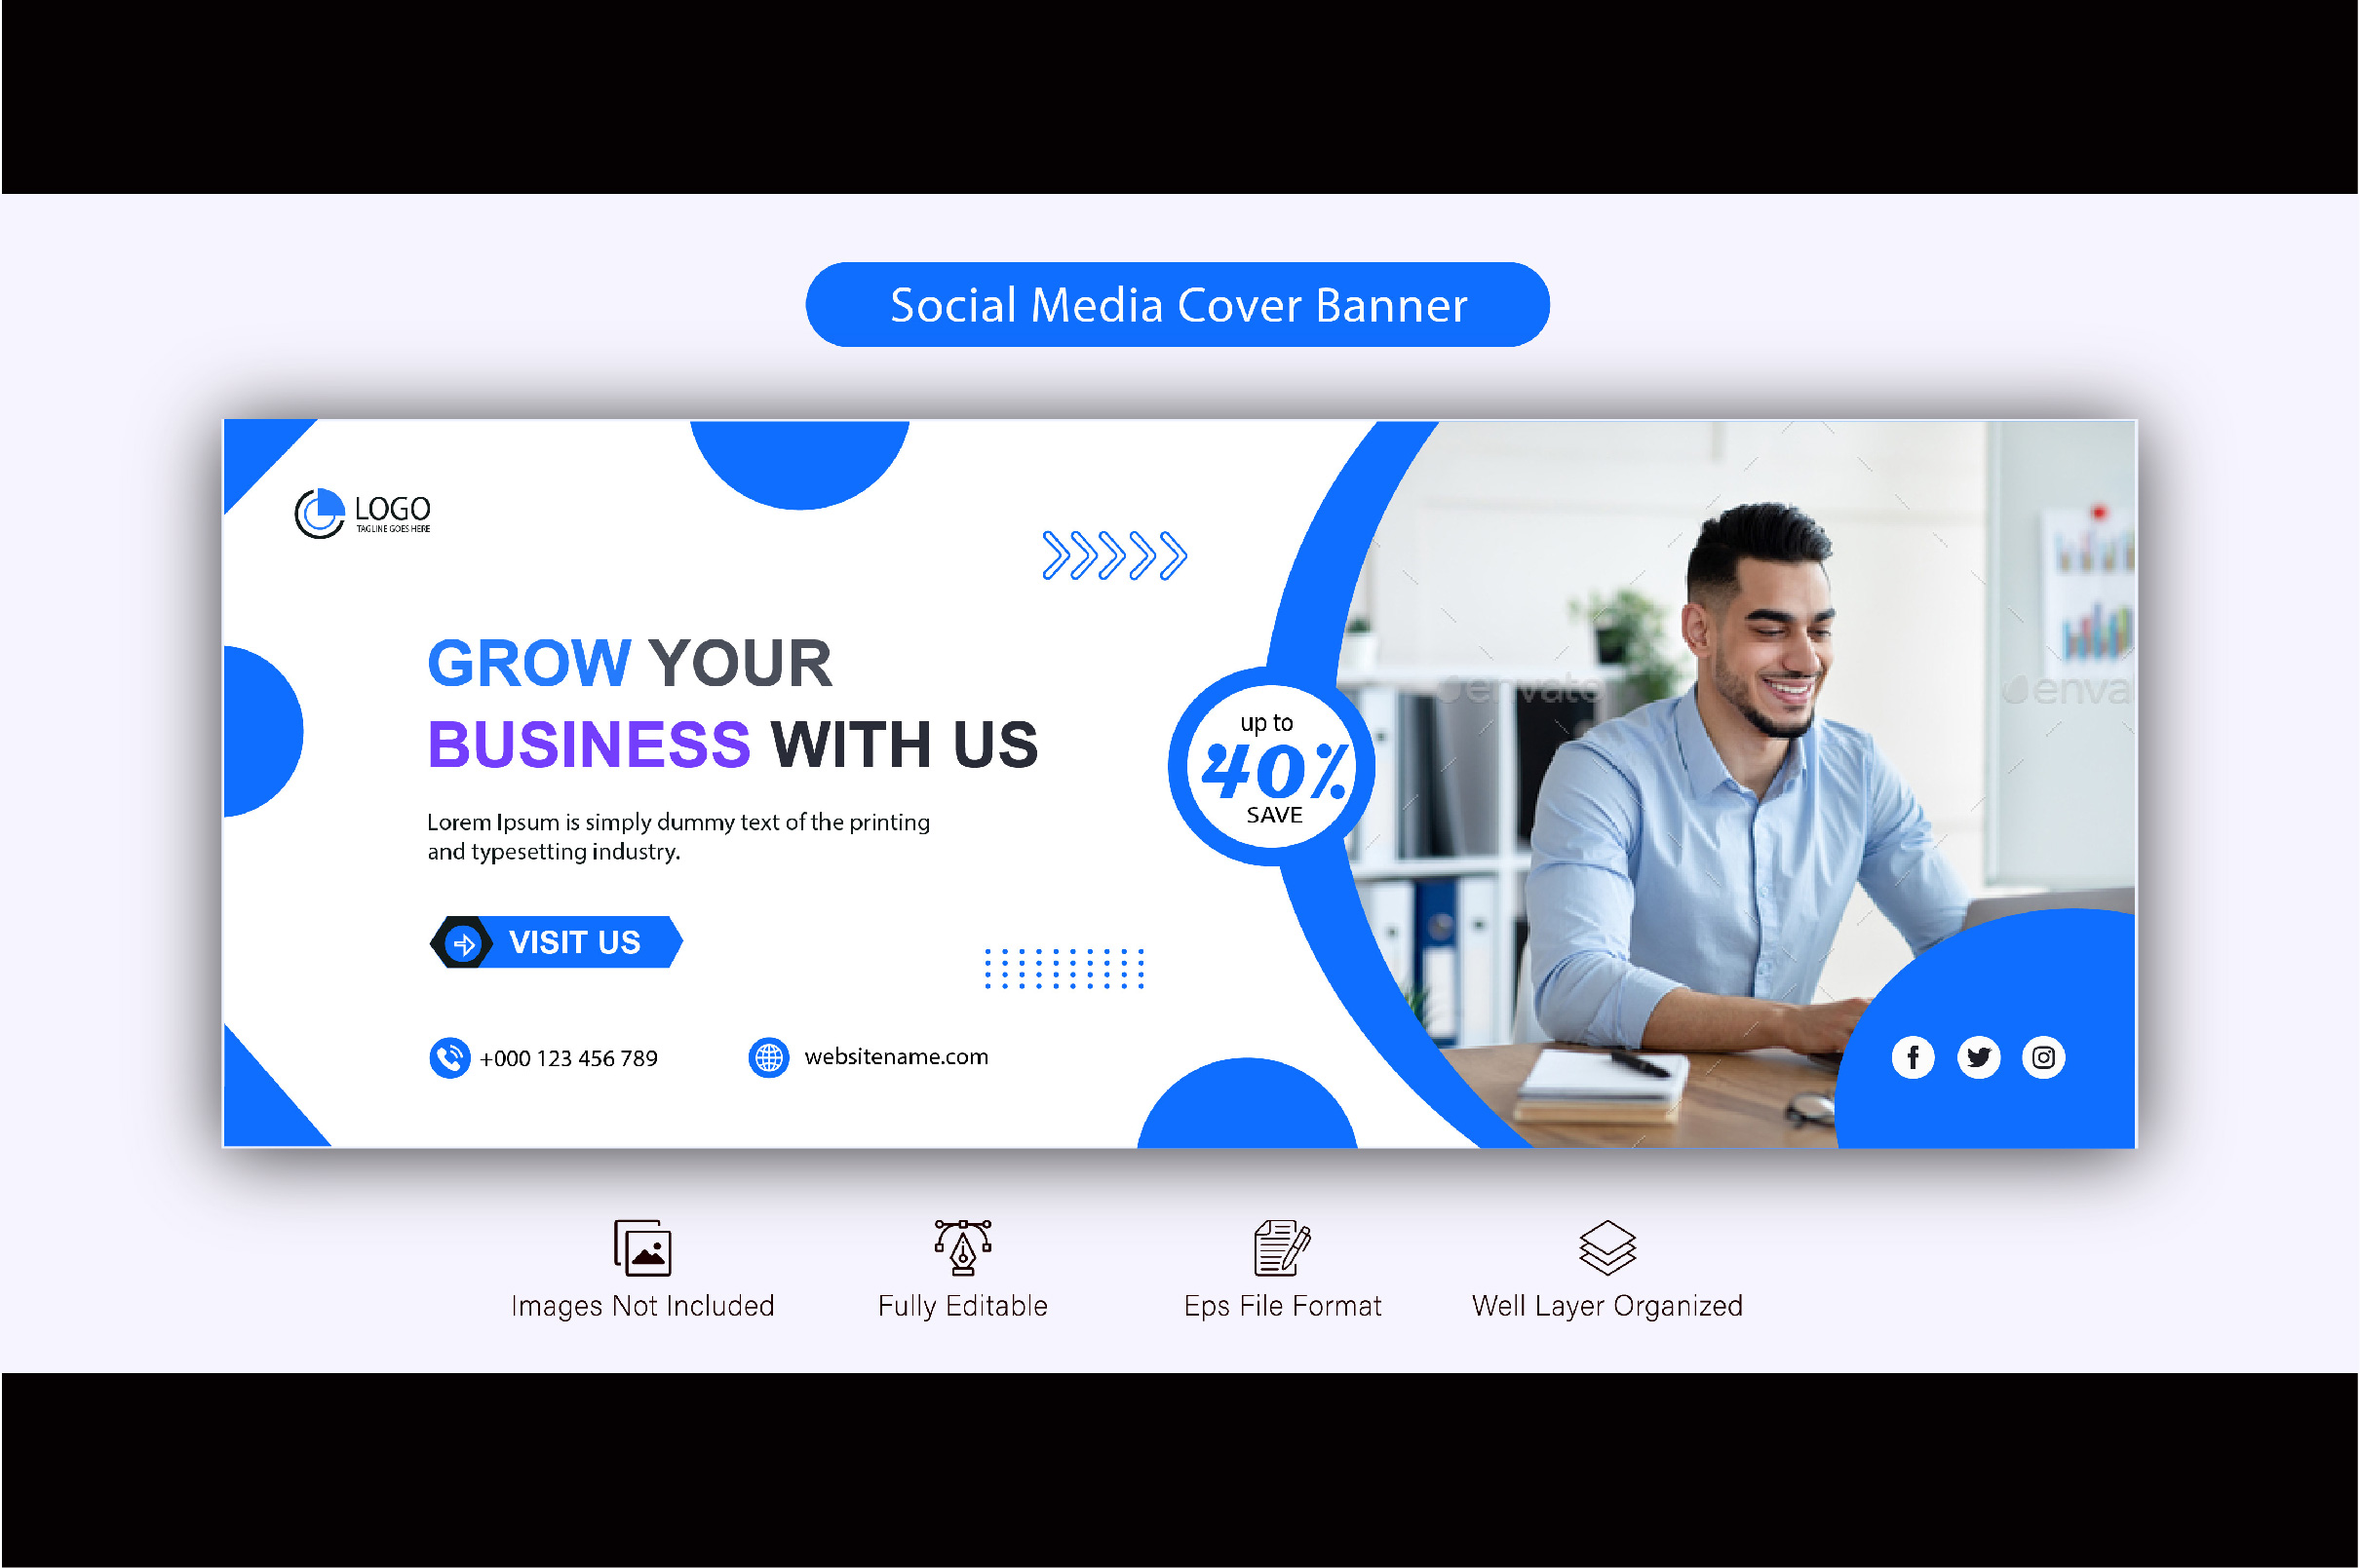 Facebook Cover Banner Design Bundle 03, grow your business.